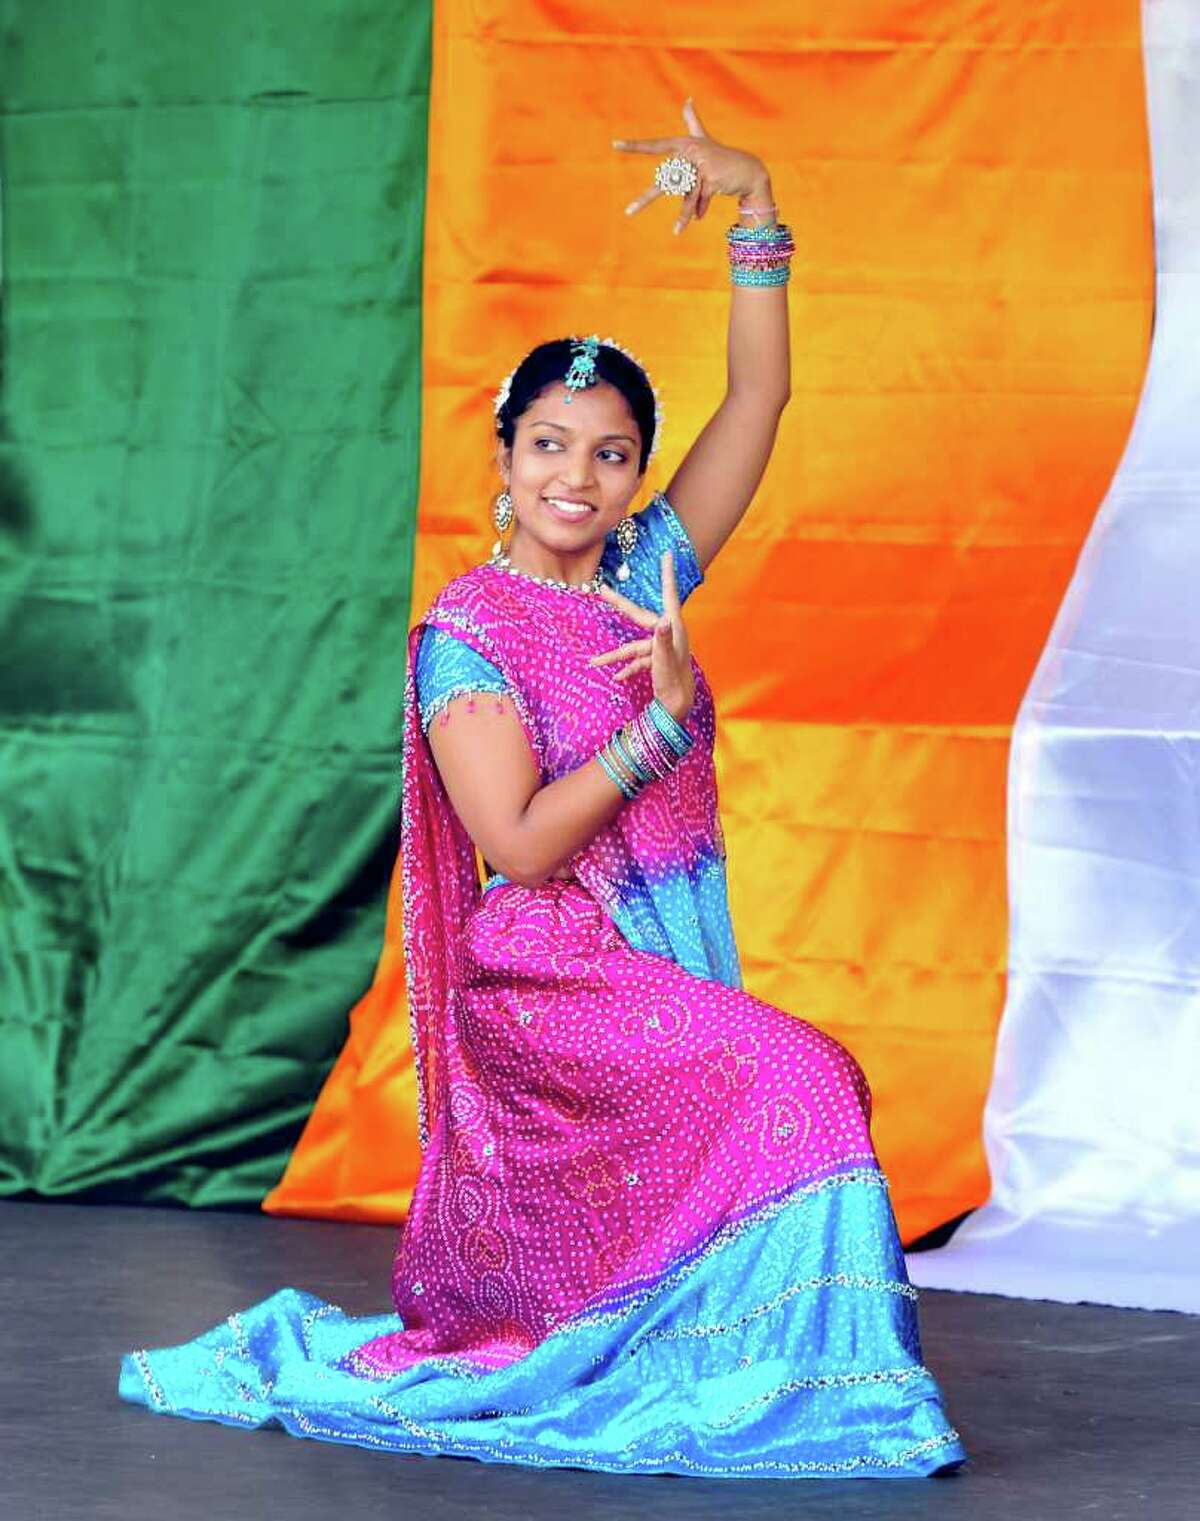 Megha Gupta, 25, of Danbury, performs during the Jai Ho Festival sponsored by the Indian Association of Western Connecticut, on the Danbury Green, Saturday, Aug. 14, 2010.